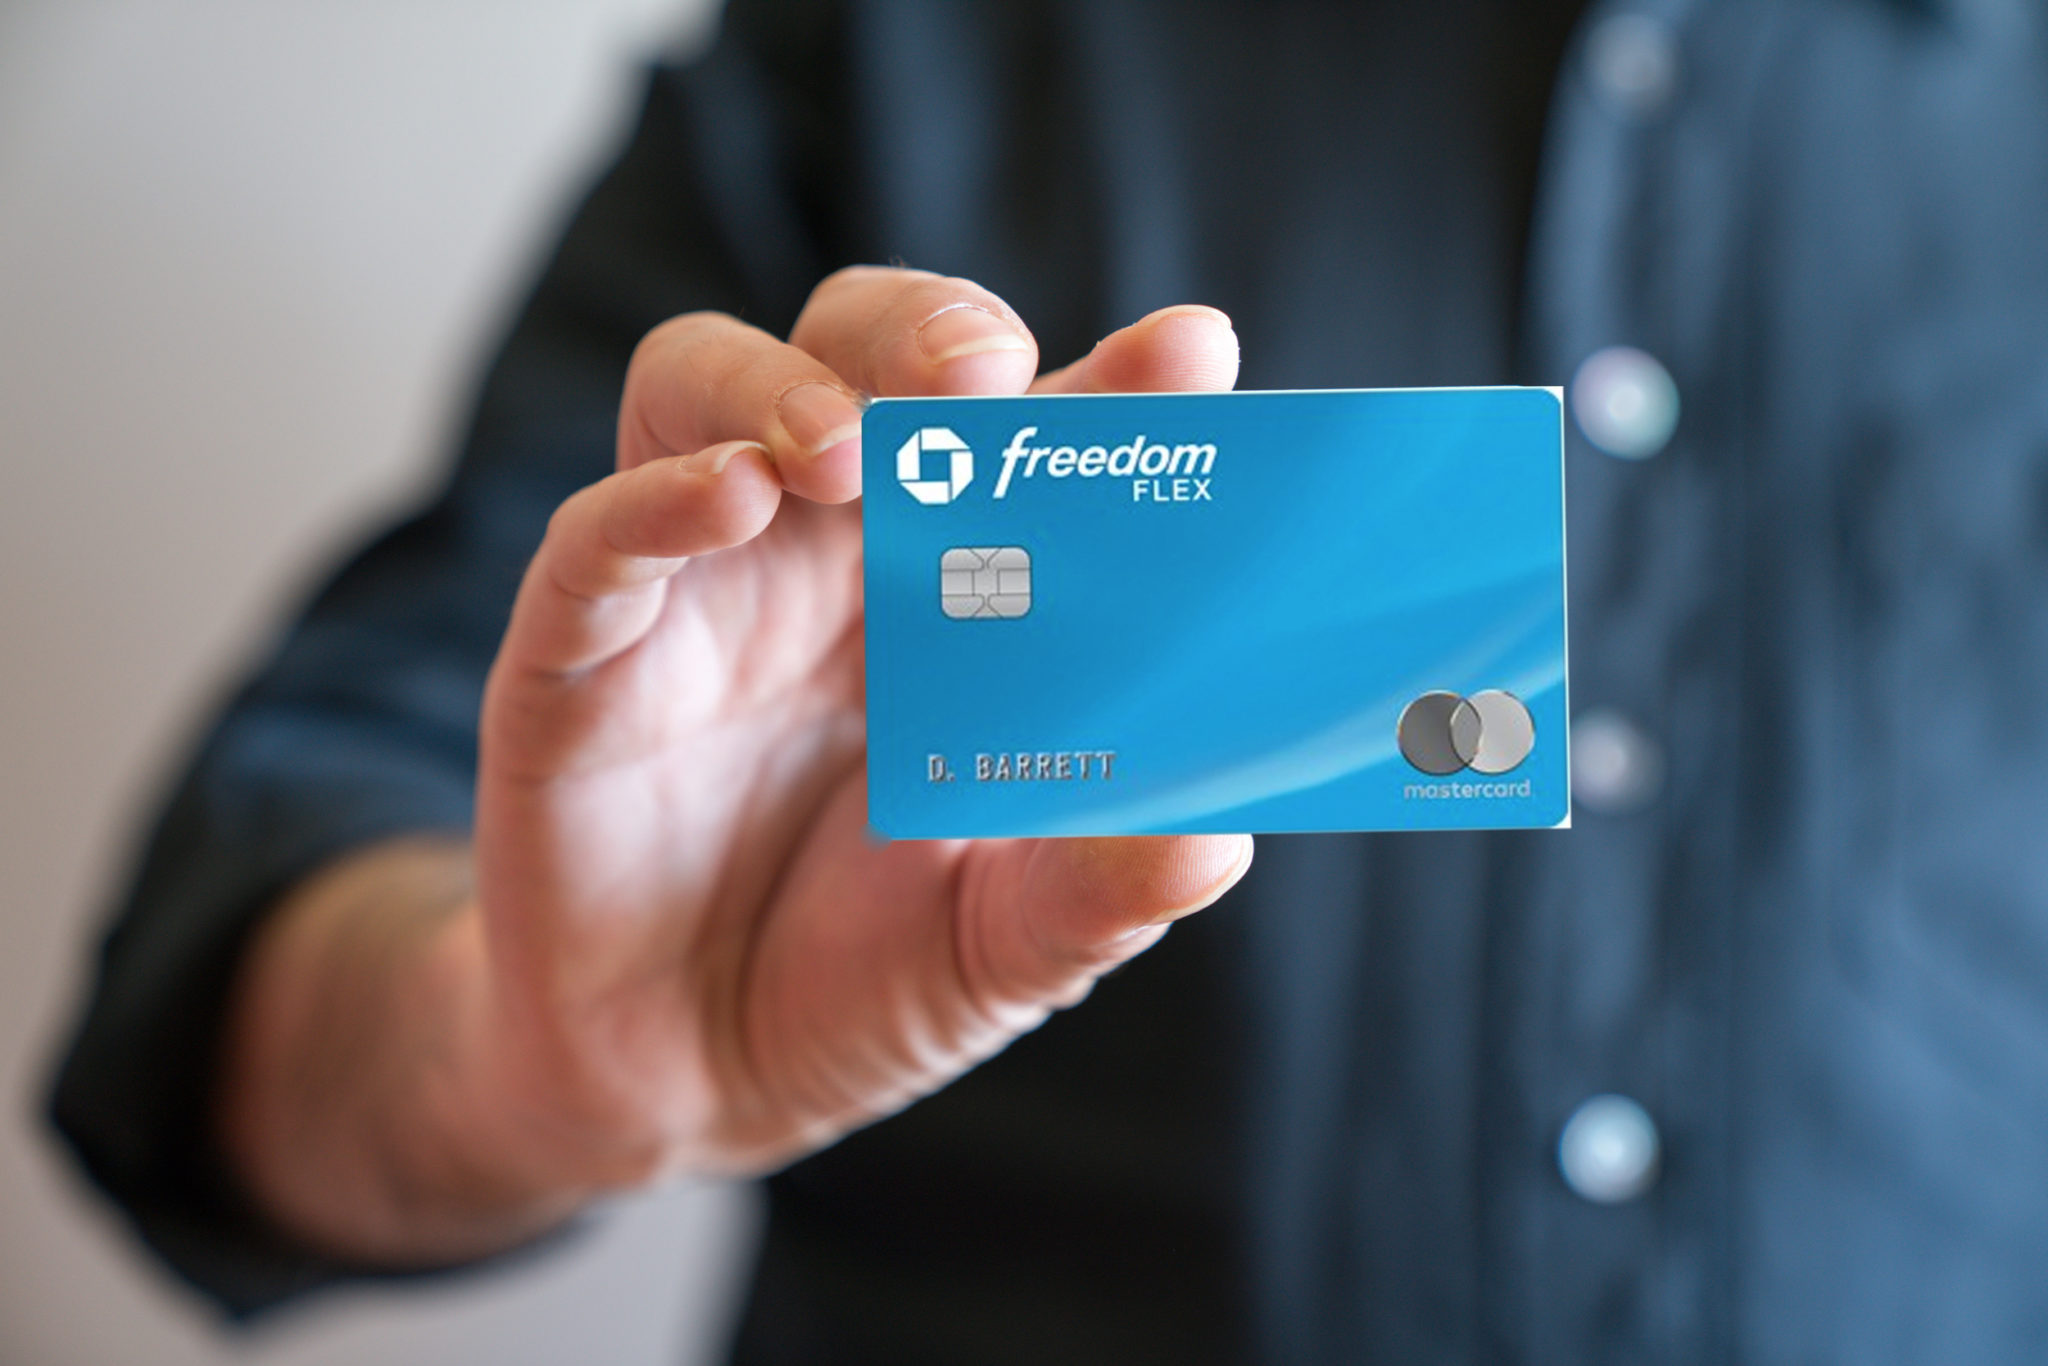 Chase Announces New "Freedom Flex" Product, Boasts "Ultimate NoFee